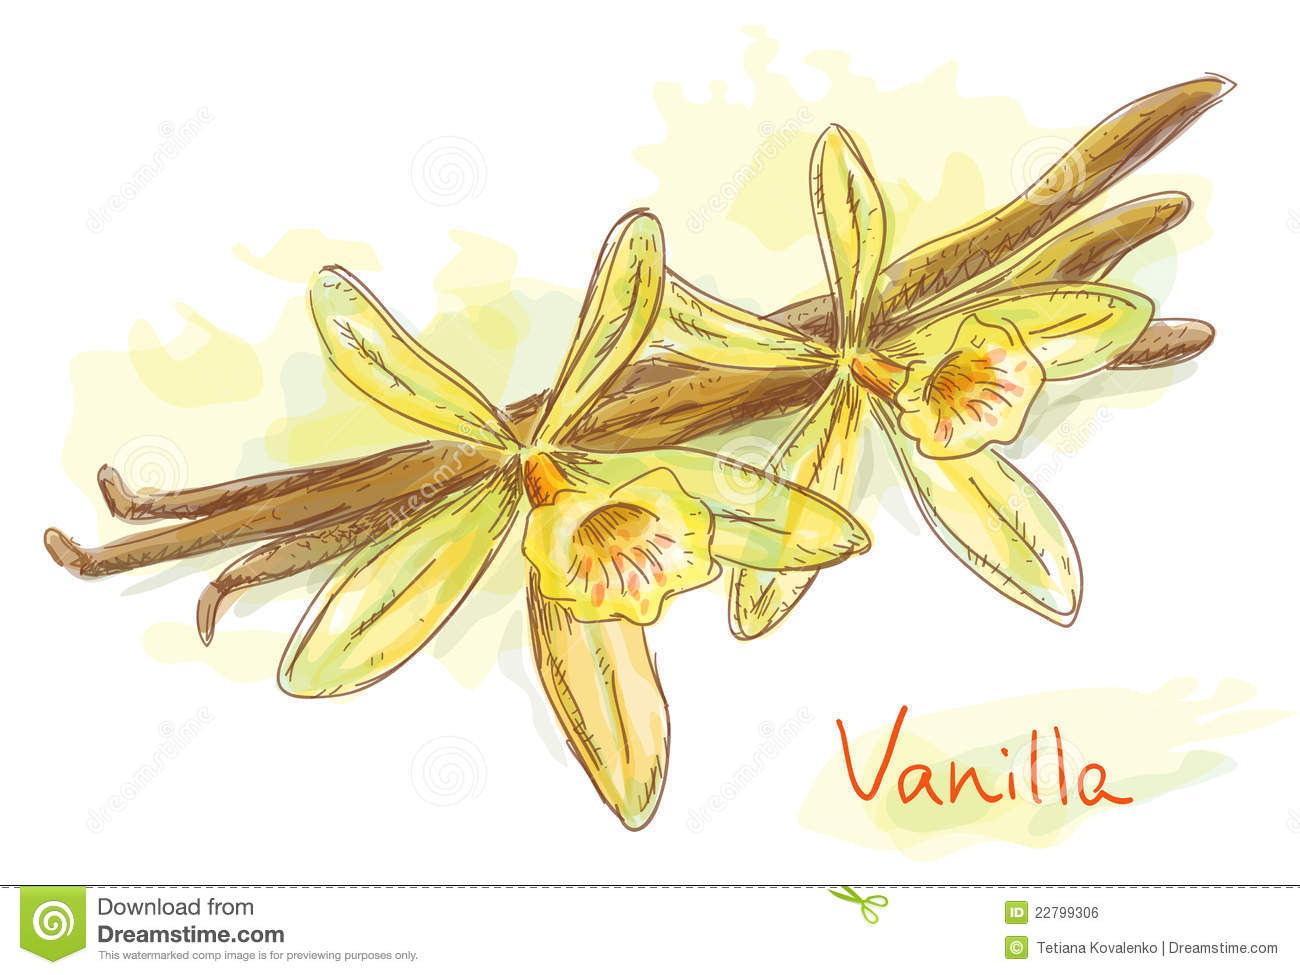 Flower Vanilla With Dried Pods  Royalty Free Stock Image   Image    